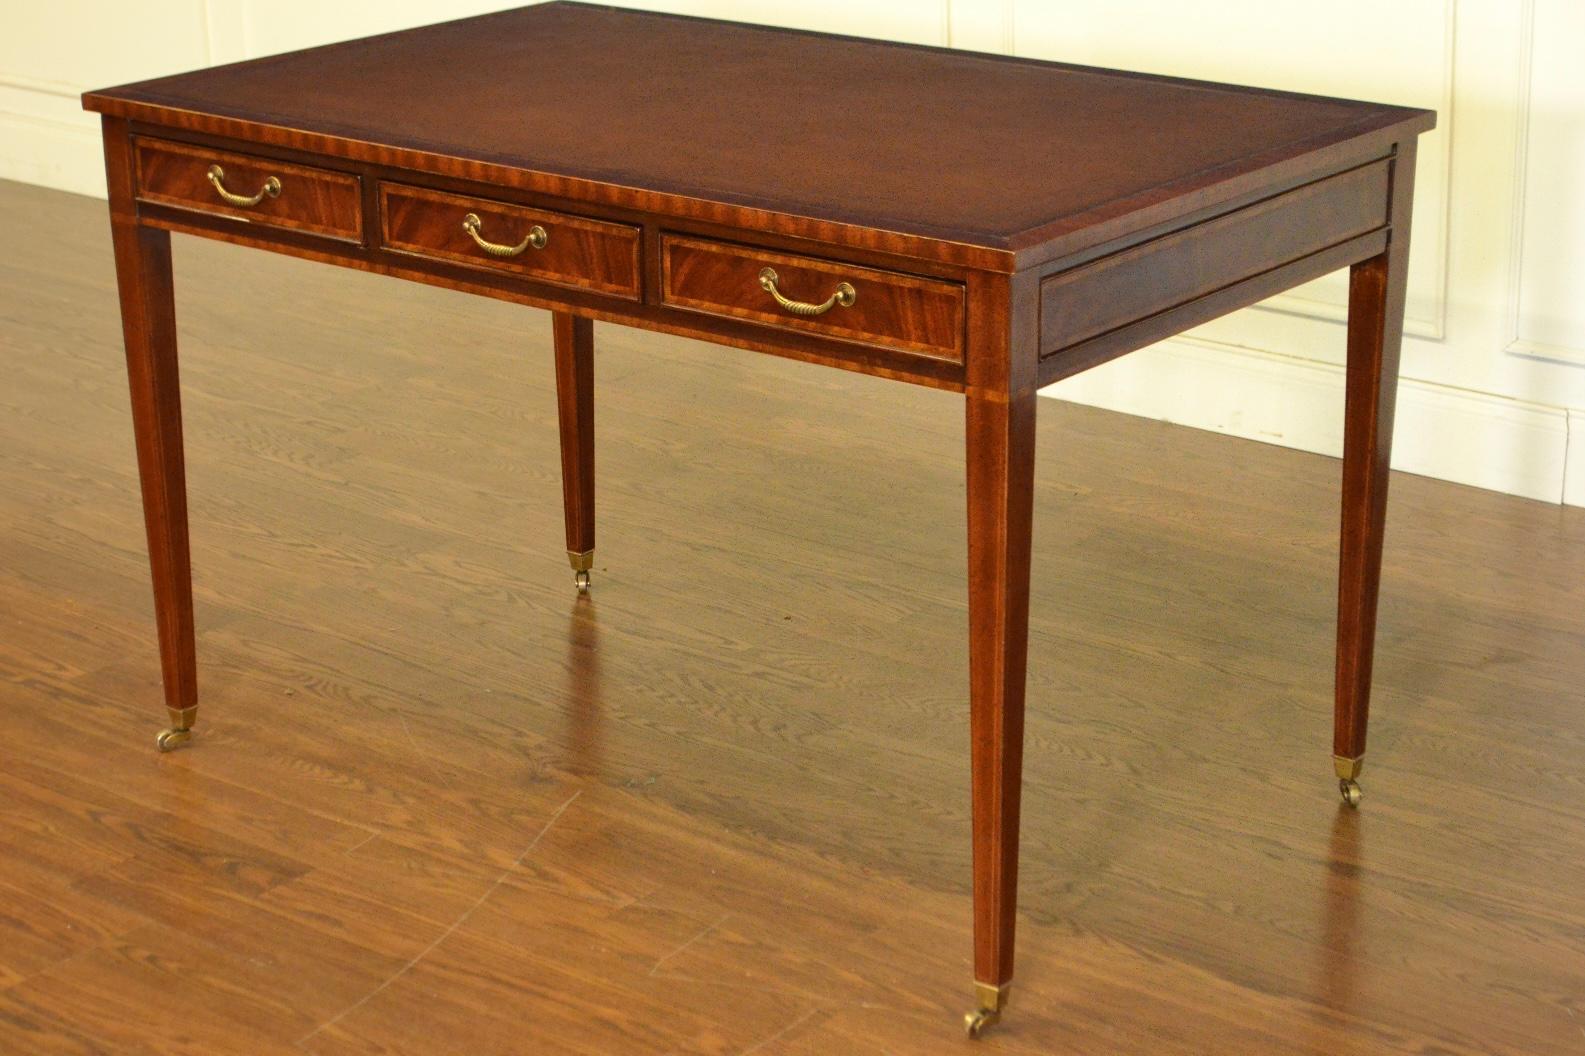 This is a new Hepplewhite style writing desk. It is ideal for the home office, library, or reception area in a business setting. It features a top of brown leather with gold tooling. Its front, back and side panels and drawers have crotch mahogany